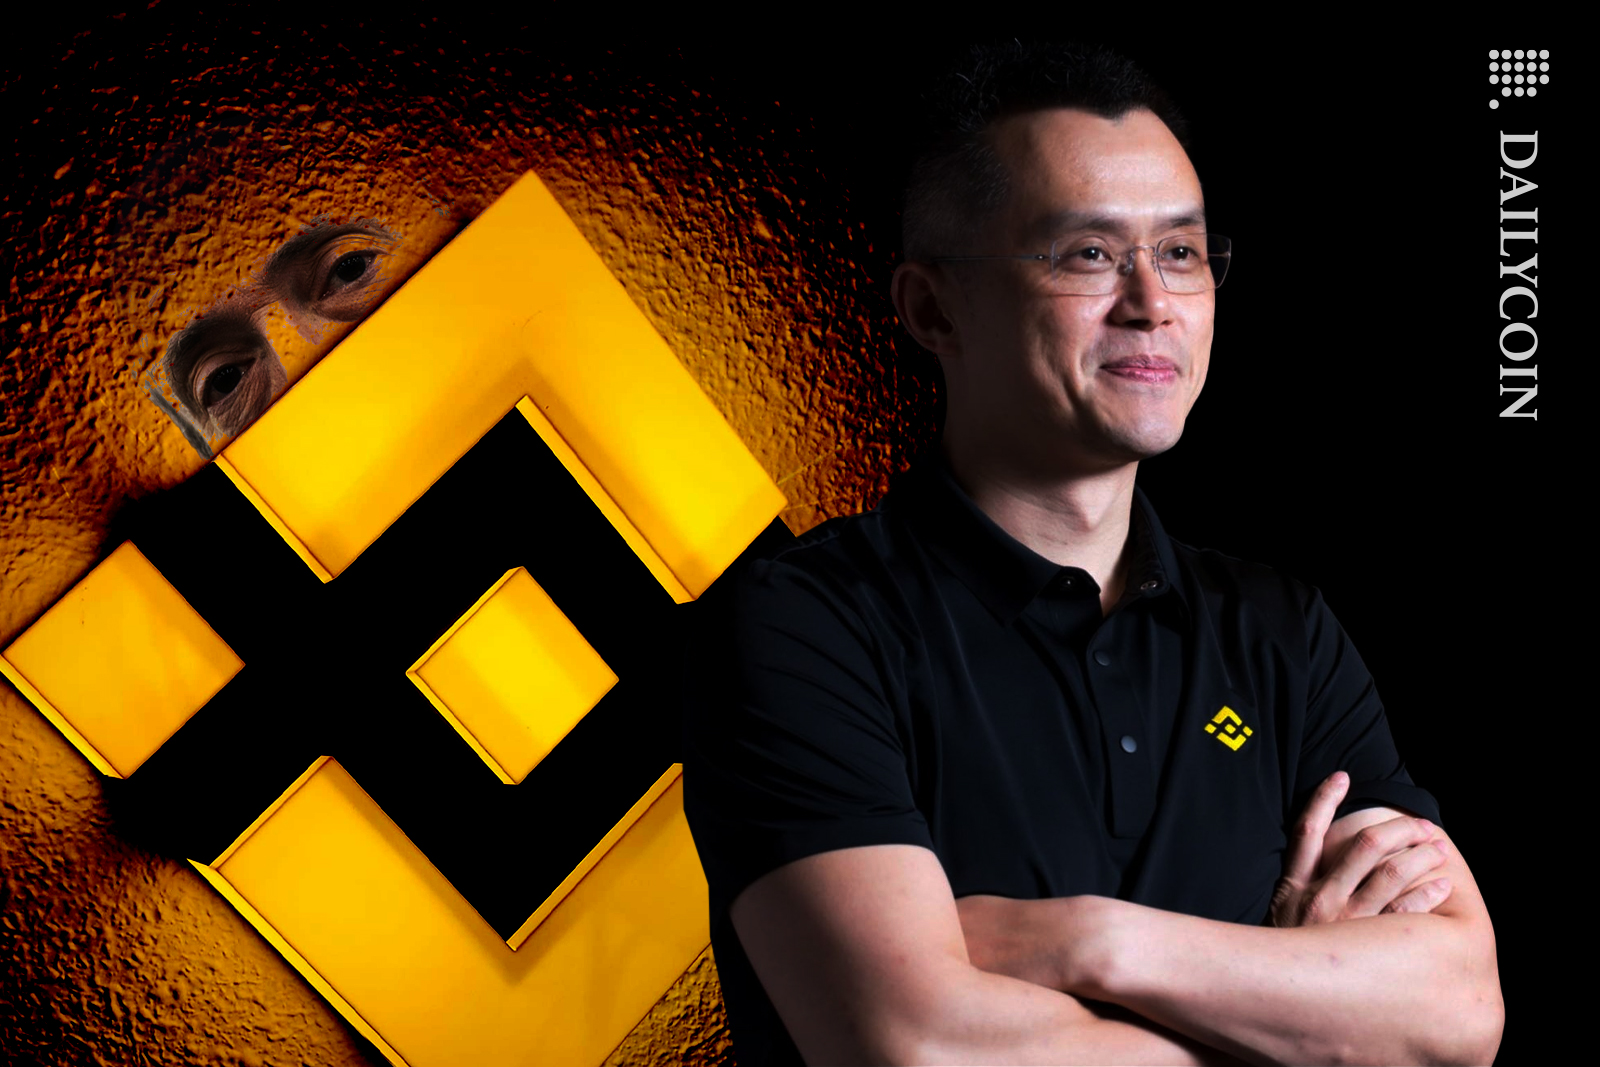 Binance Ceo Changpeng Zhao looking pleased, whist Gary Gensler is is eyeing up his every move.